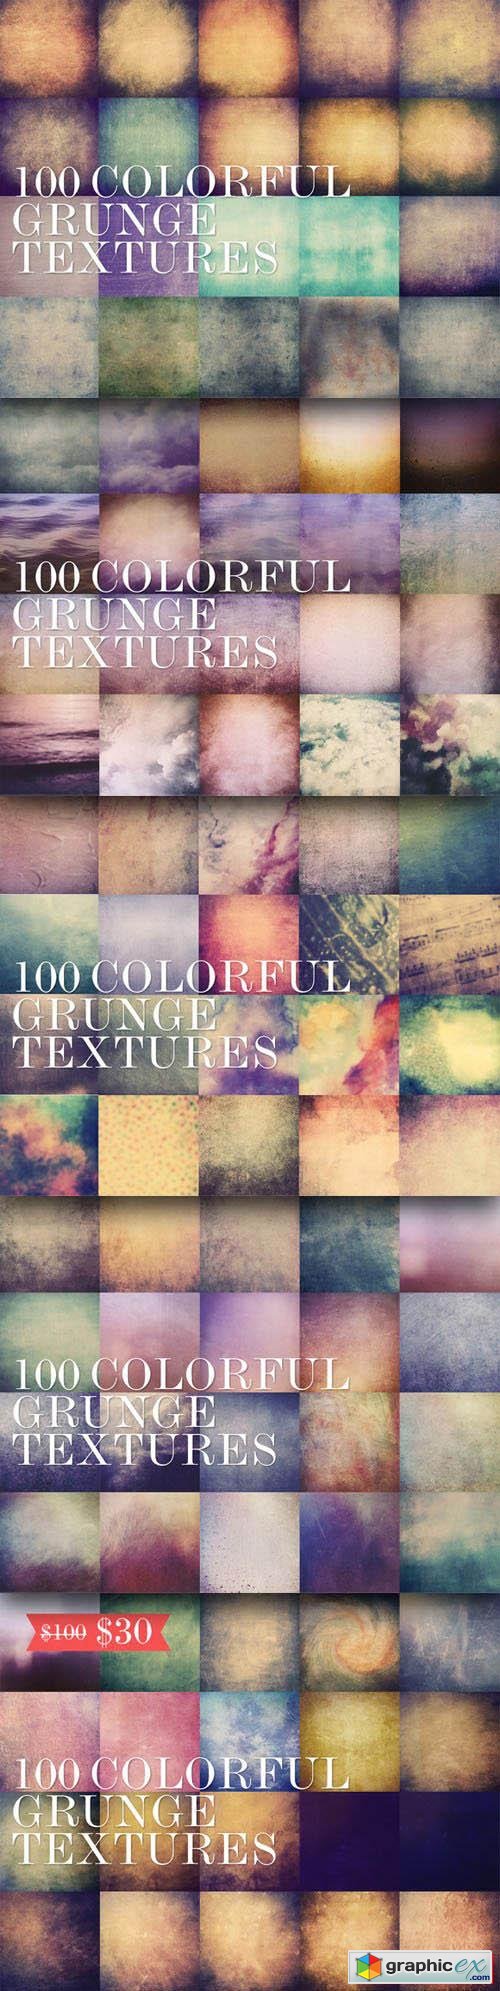 100 Colorful Grunge Textures 5000px